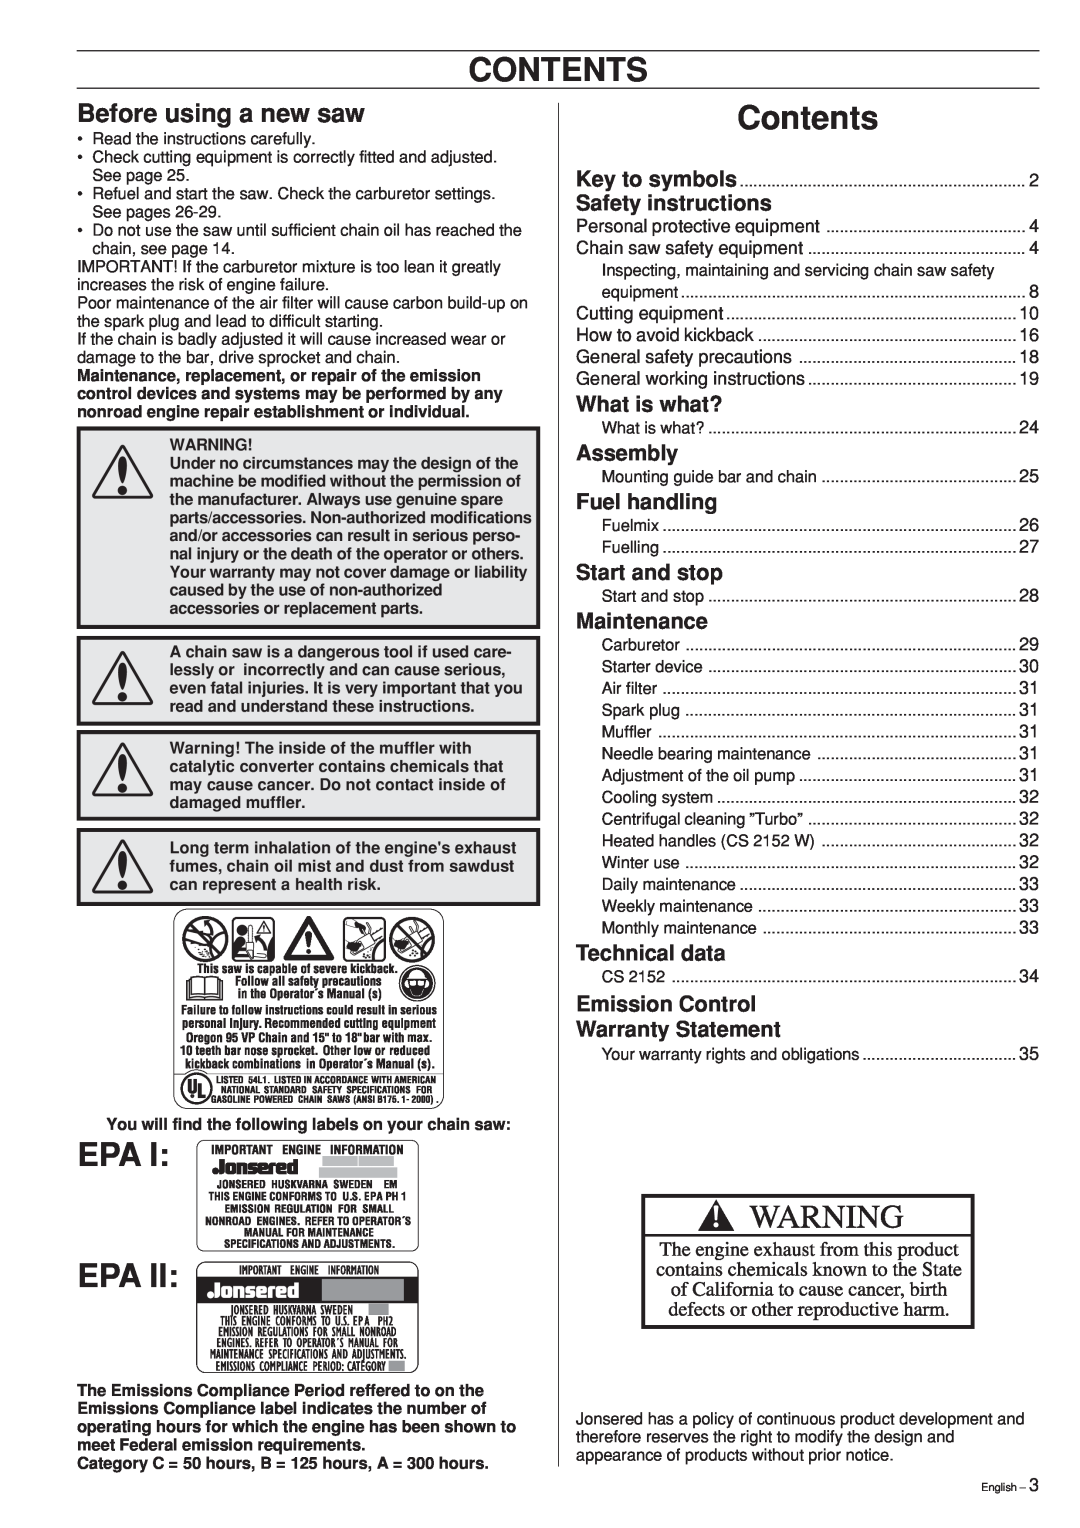 Jonsered CS 2152 Contents, Epa Epa, Before using a new saw, Safety instructions, What is what?, Assembly, Fuel handling 